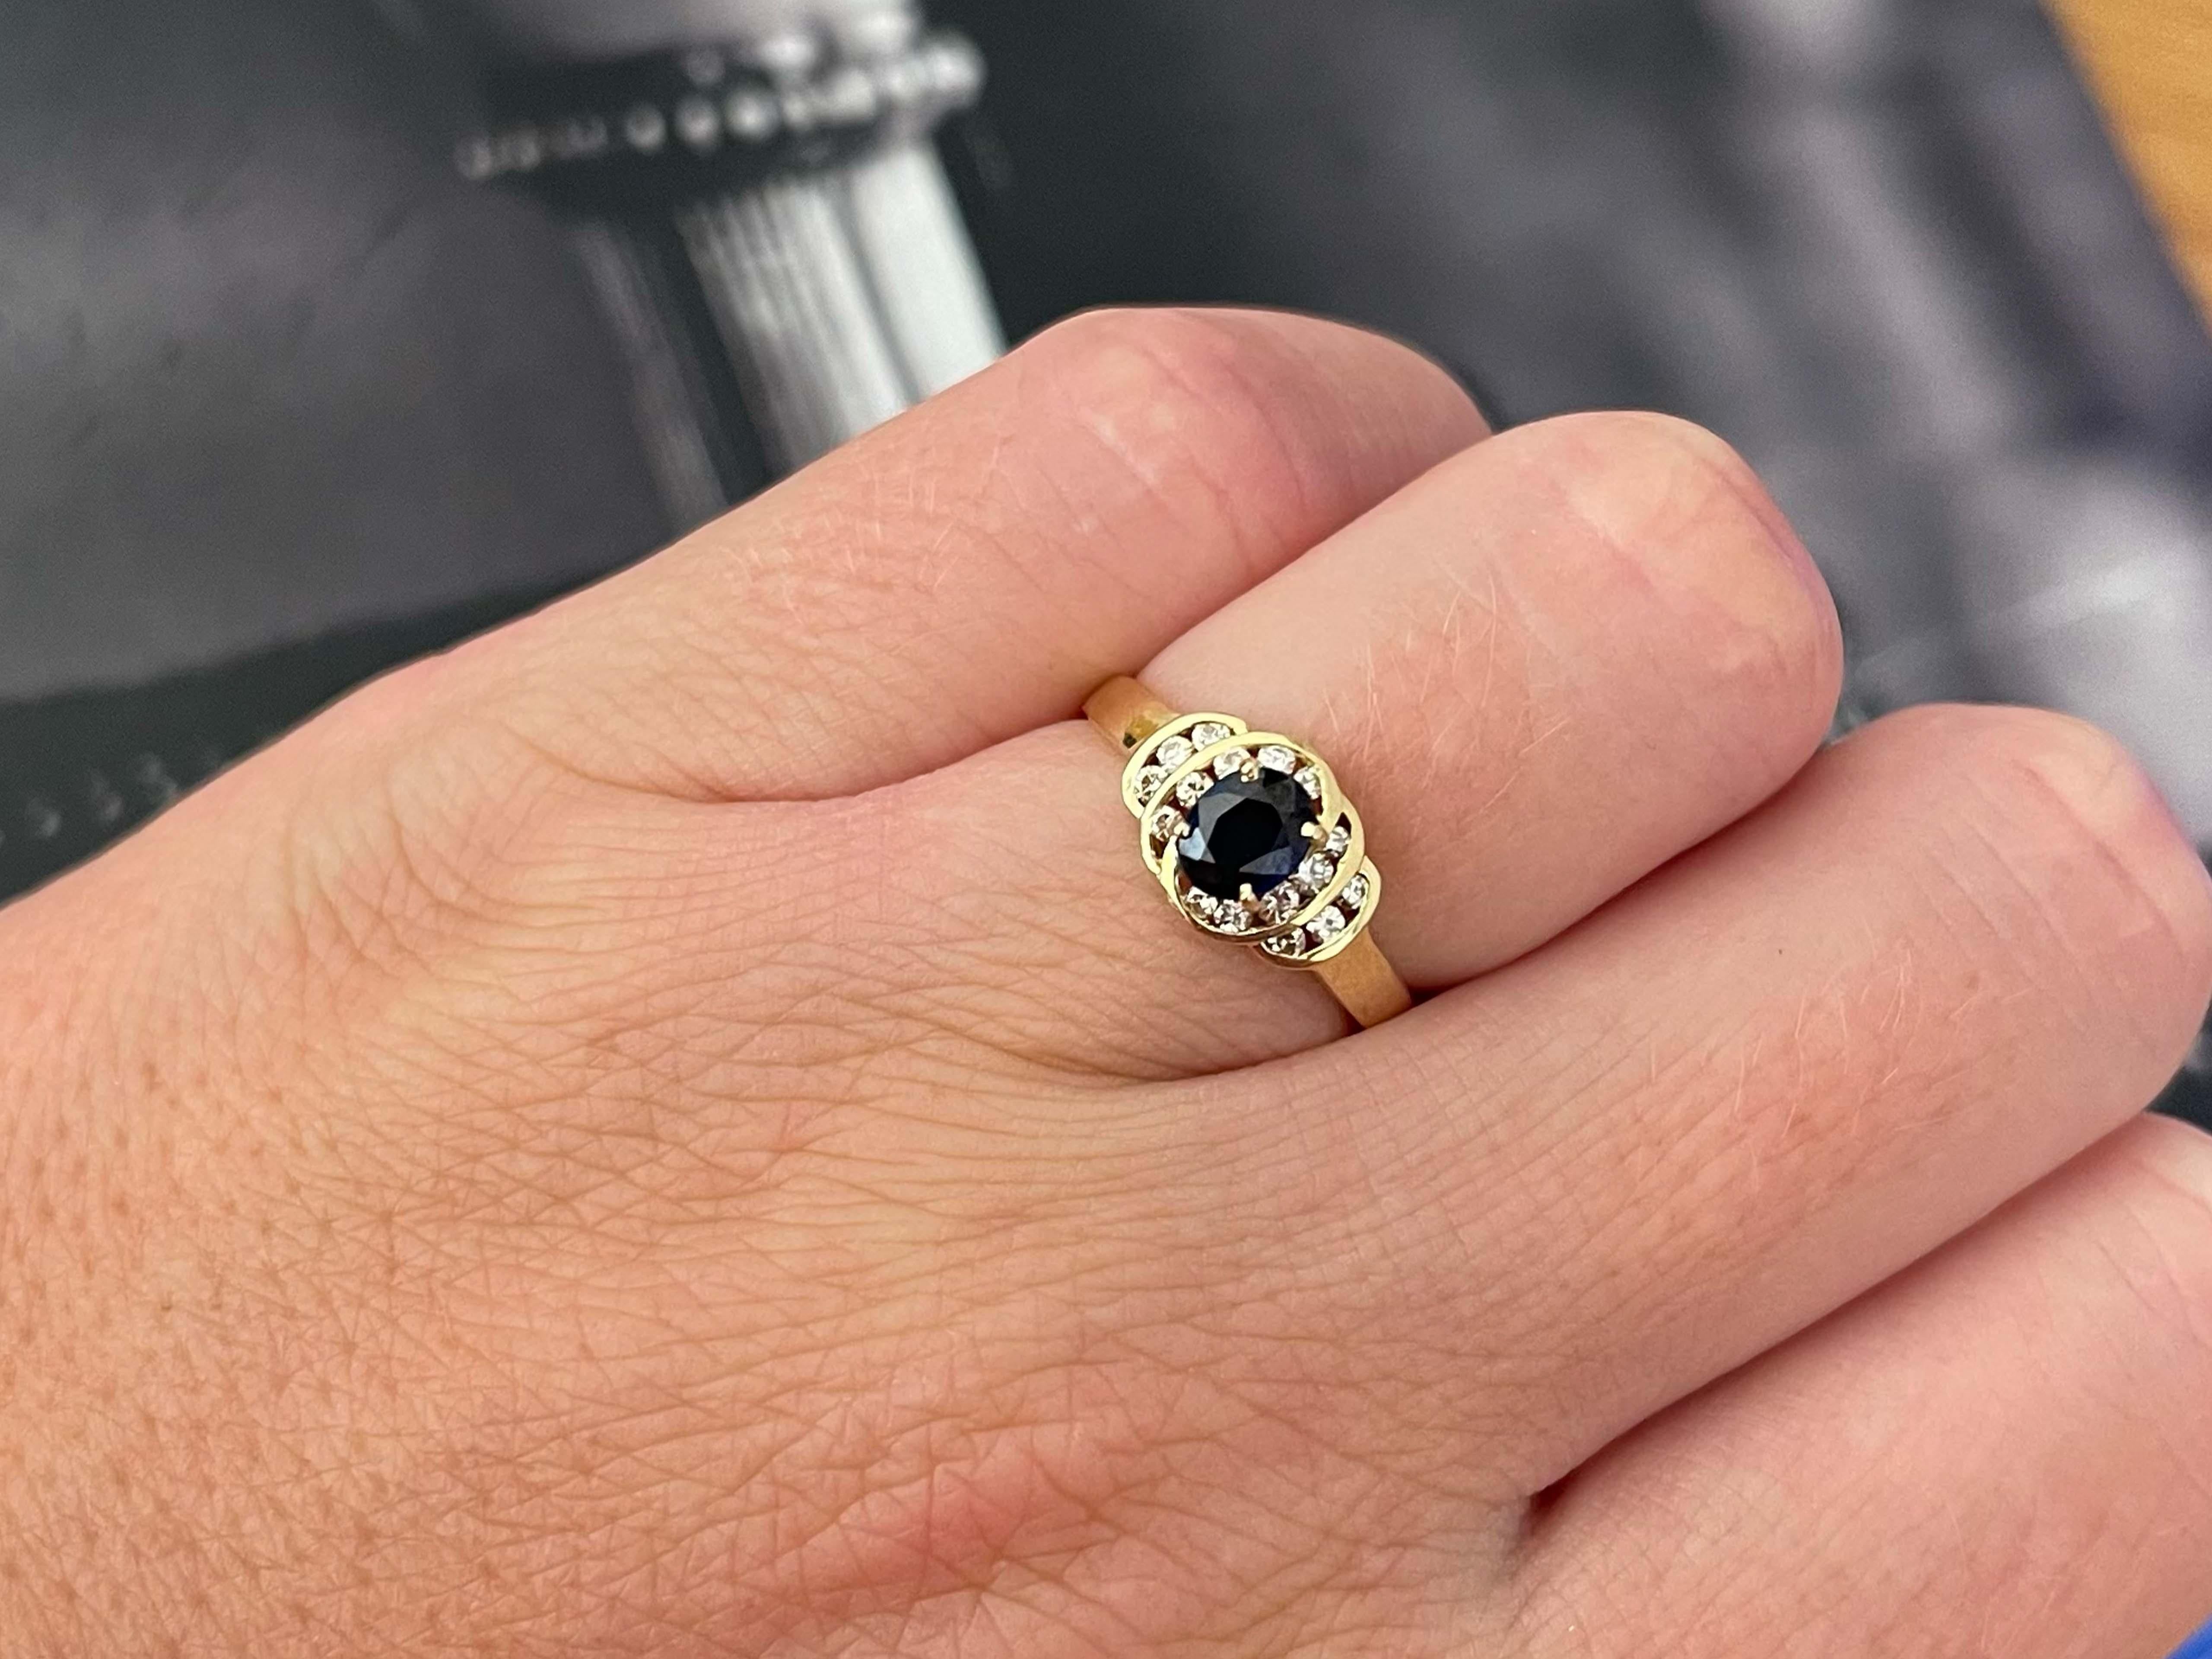 Item Specifications:

Metal: 14K Yellow Gold

Style: Statement Ring

Ring Size: 6 (resizing available for a fee)

Total Weight: 2.1 Grams

Ring Height: 7.76 mm

Gemstone Specifications:

Gemstone: 1 blue sapphire

Shape: oval

Sapphire Measurements: